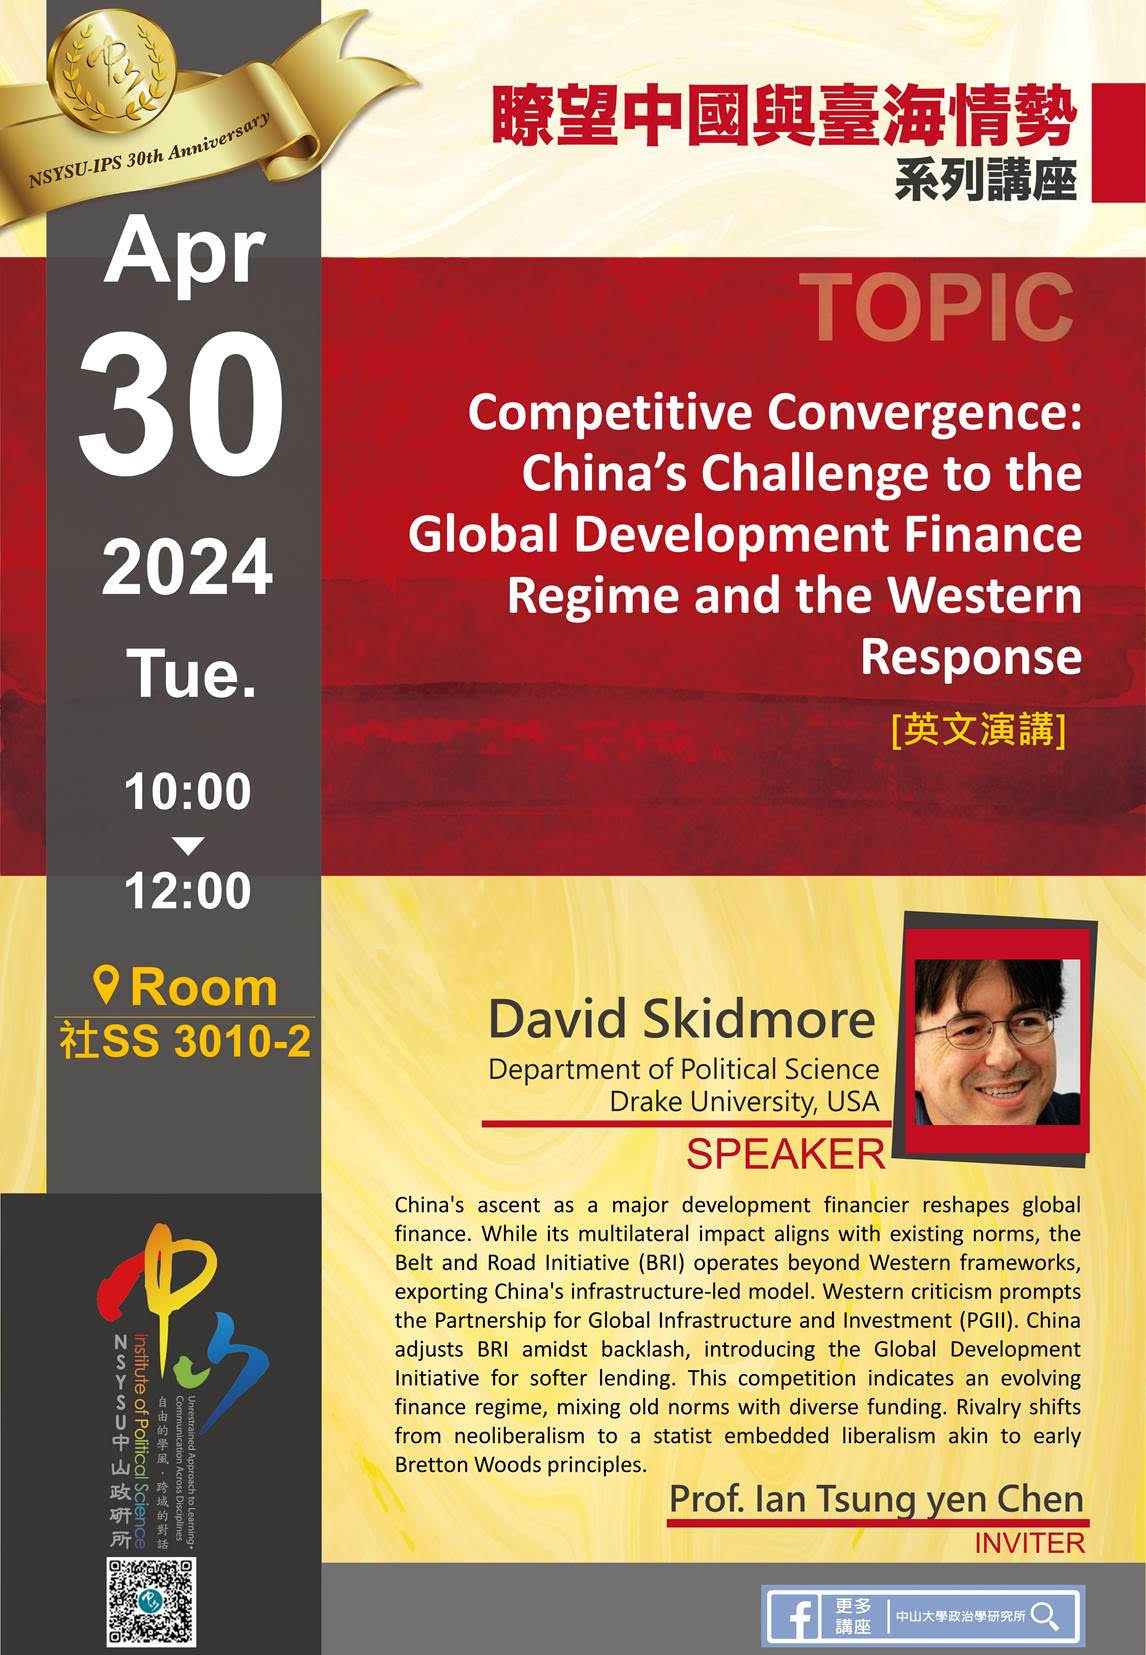 Competitive Convergence: China’s Challenge to the Global Development Finance Regime and the Western Response